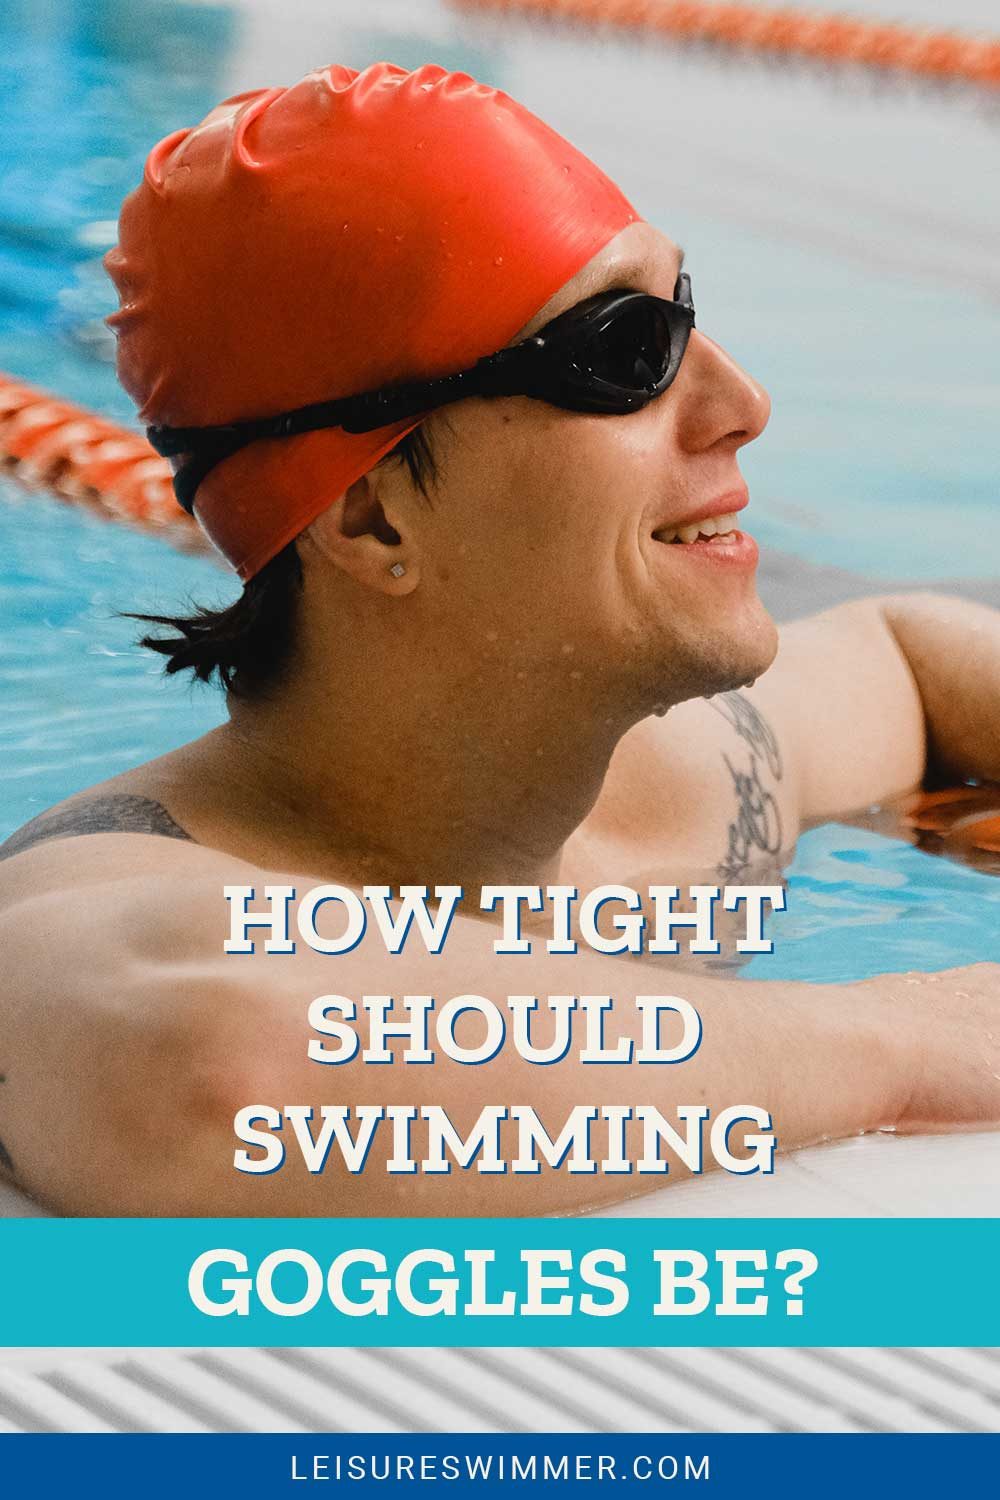 Man wearing swimming goggles smiling - How Tight Should Swimming Goggles Be?